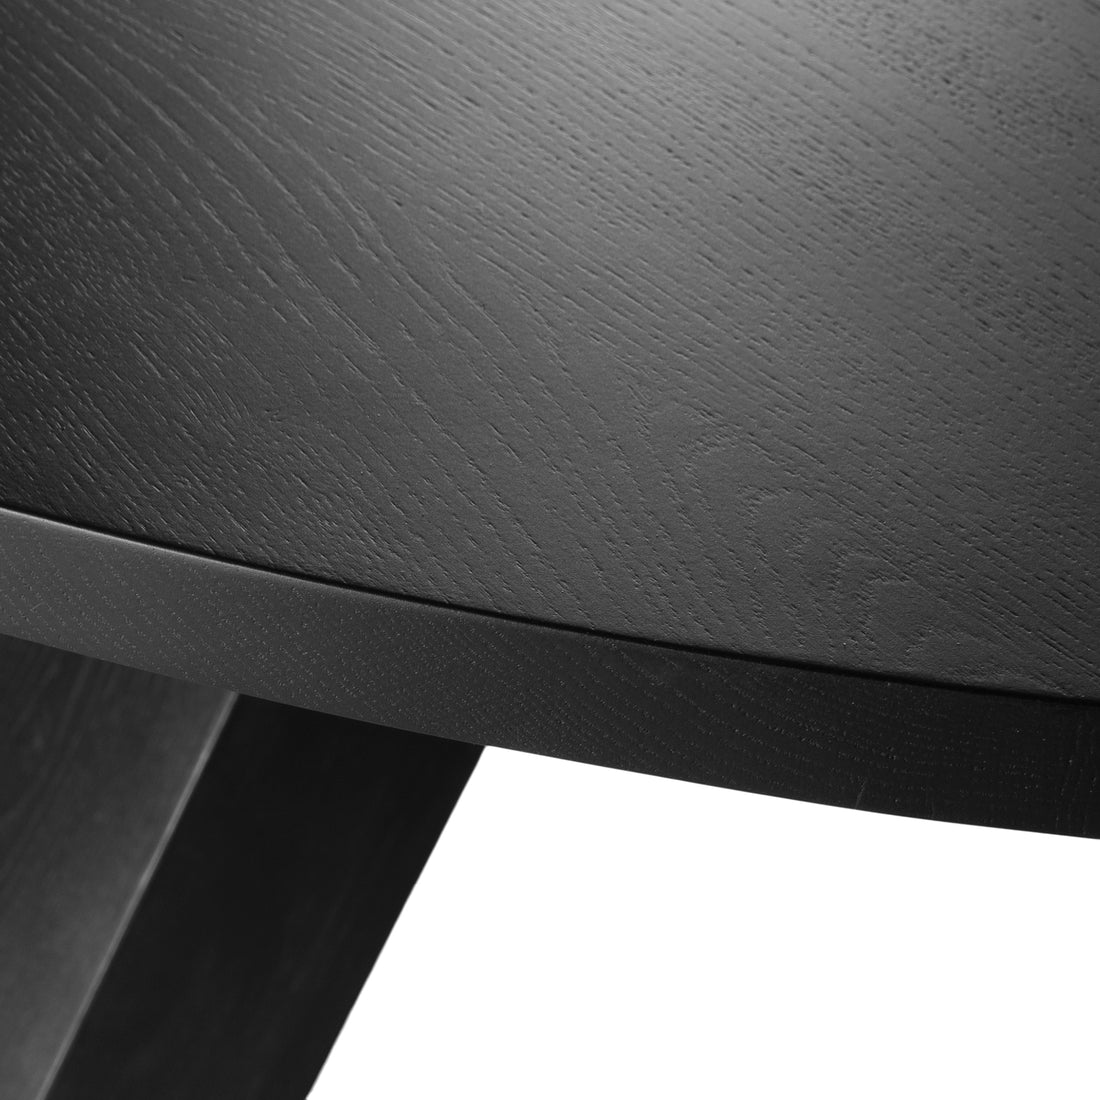 St Croix Dining Table | Black